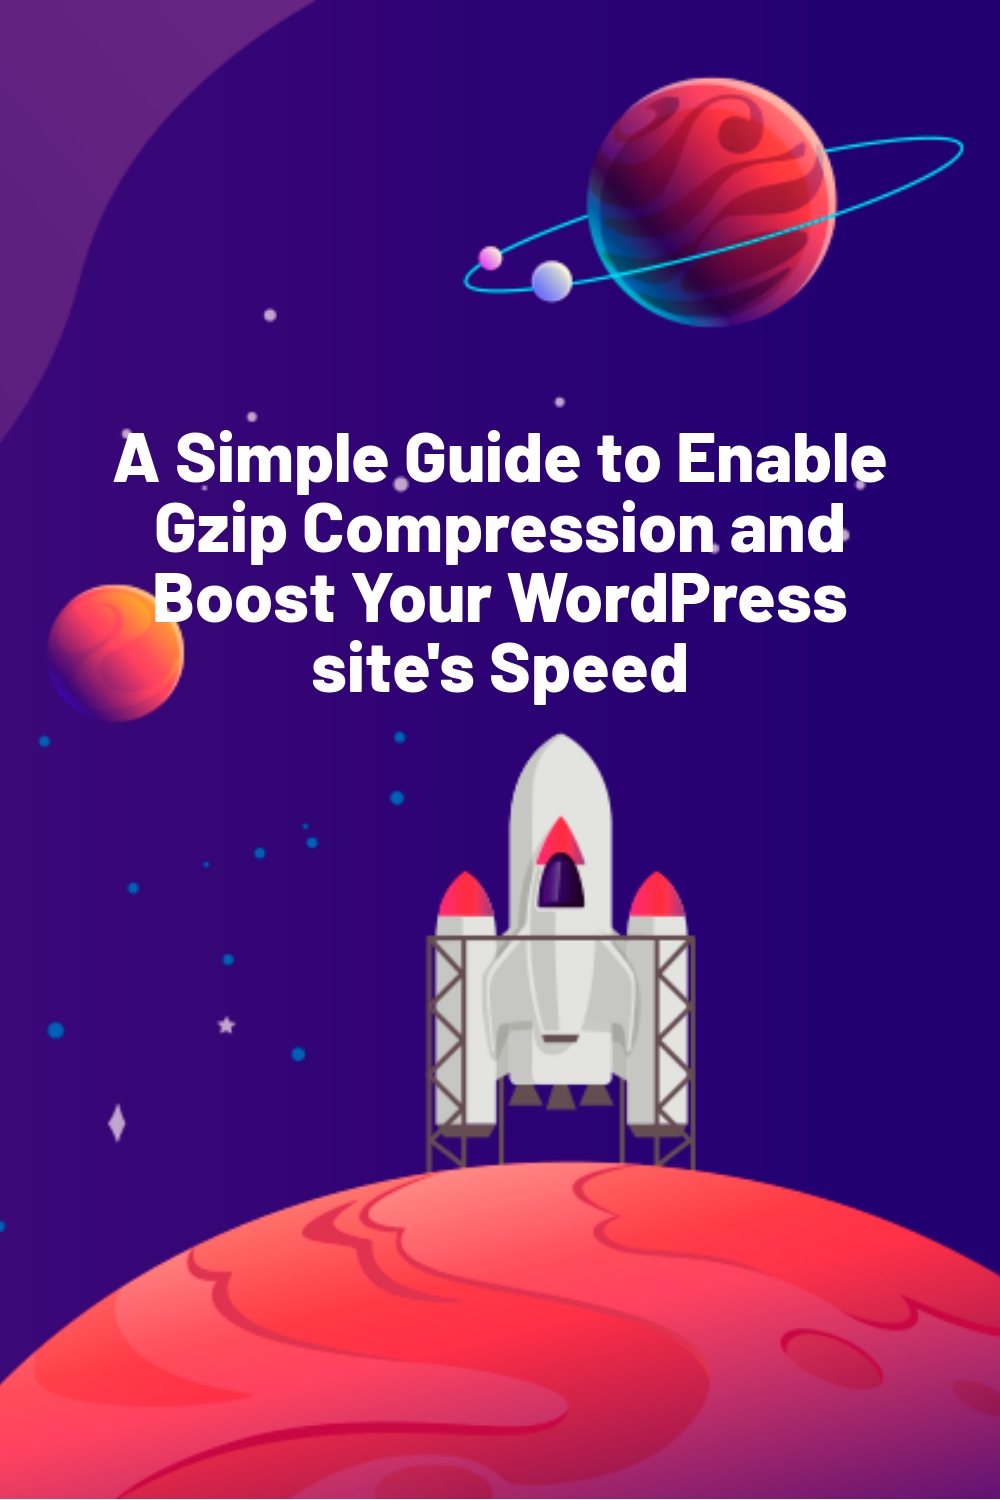 A Simple Guide to Enable Gzip Compression and Boost Your WordPress site’s Speed